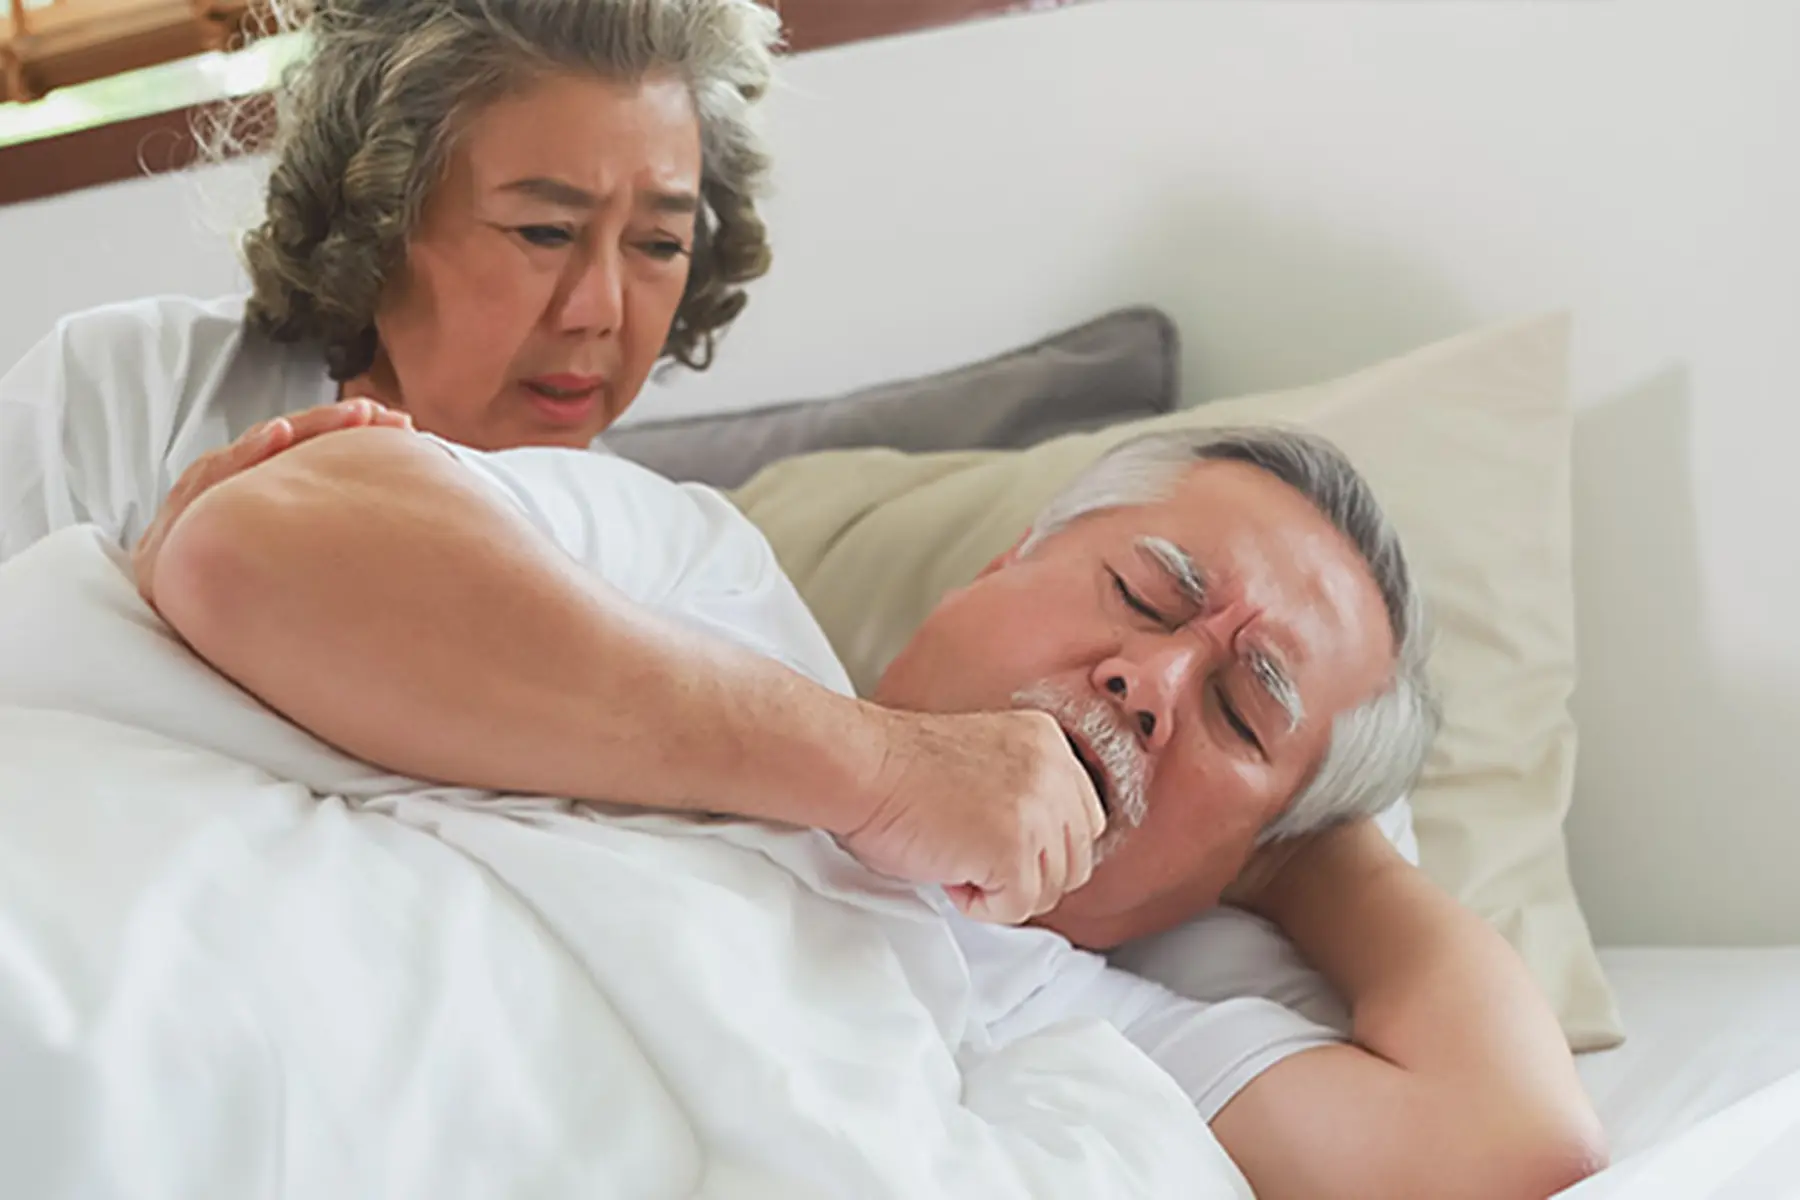 Man with tonsillitis coughing in bed as his wife looks at him concerned.